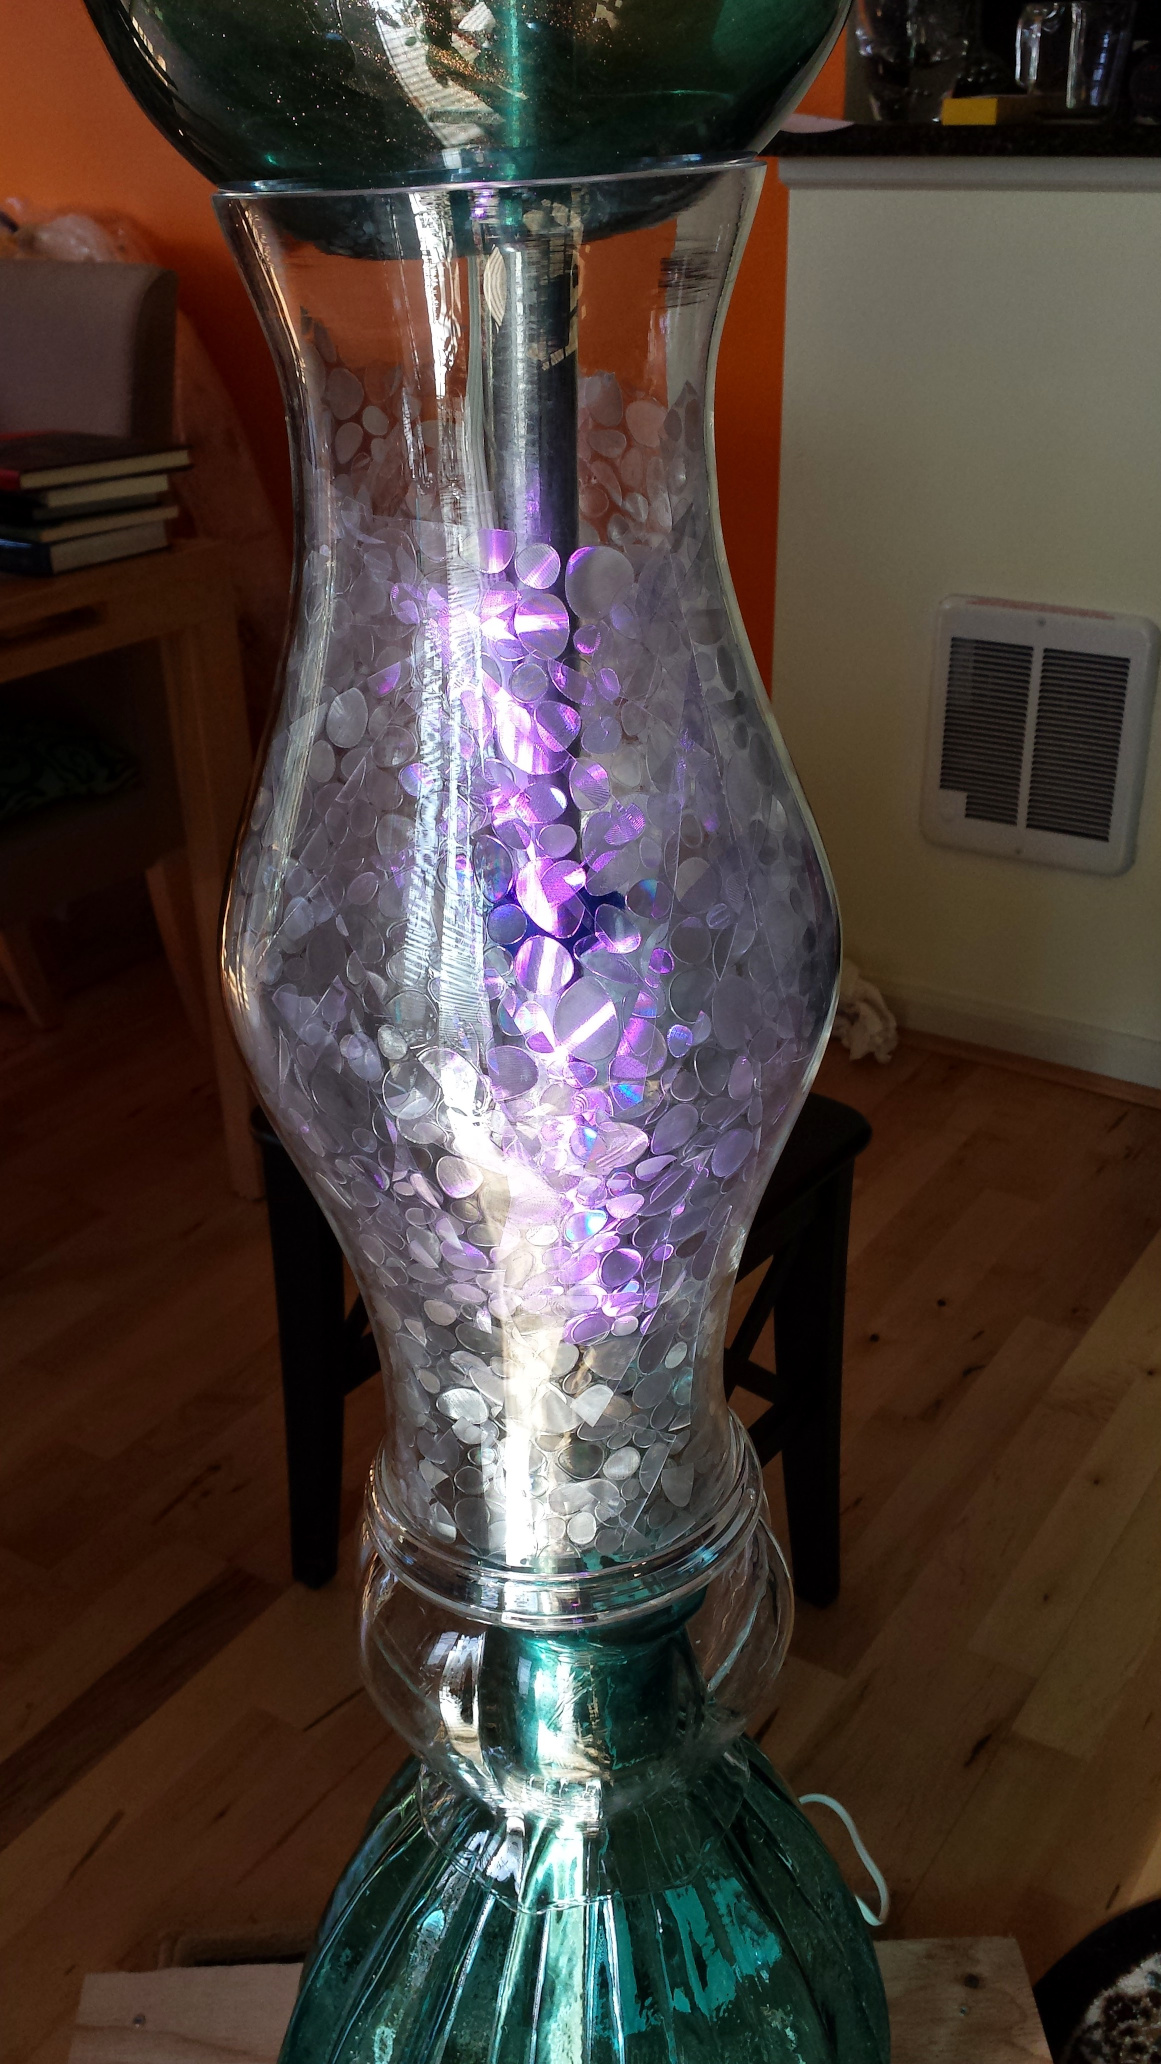 The glass vase with surface treatment and lights inside.